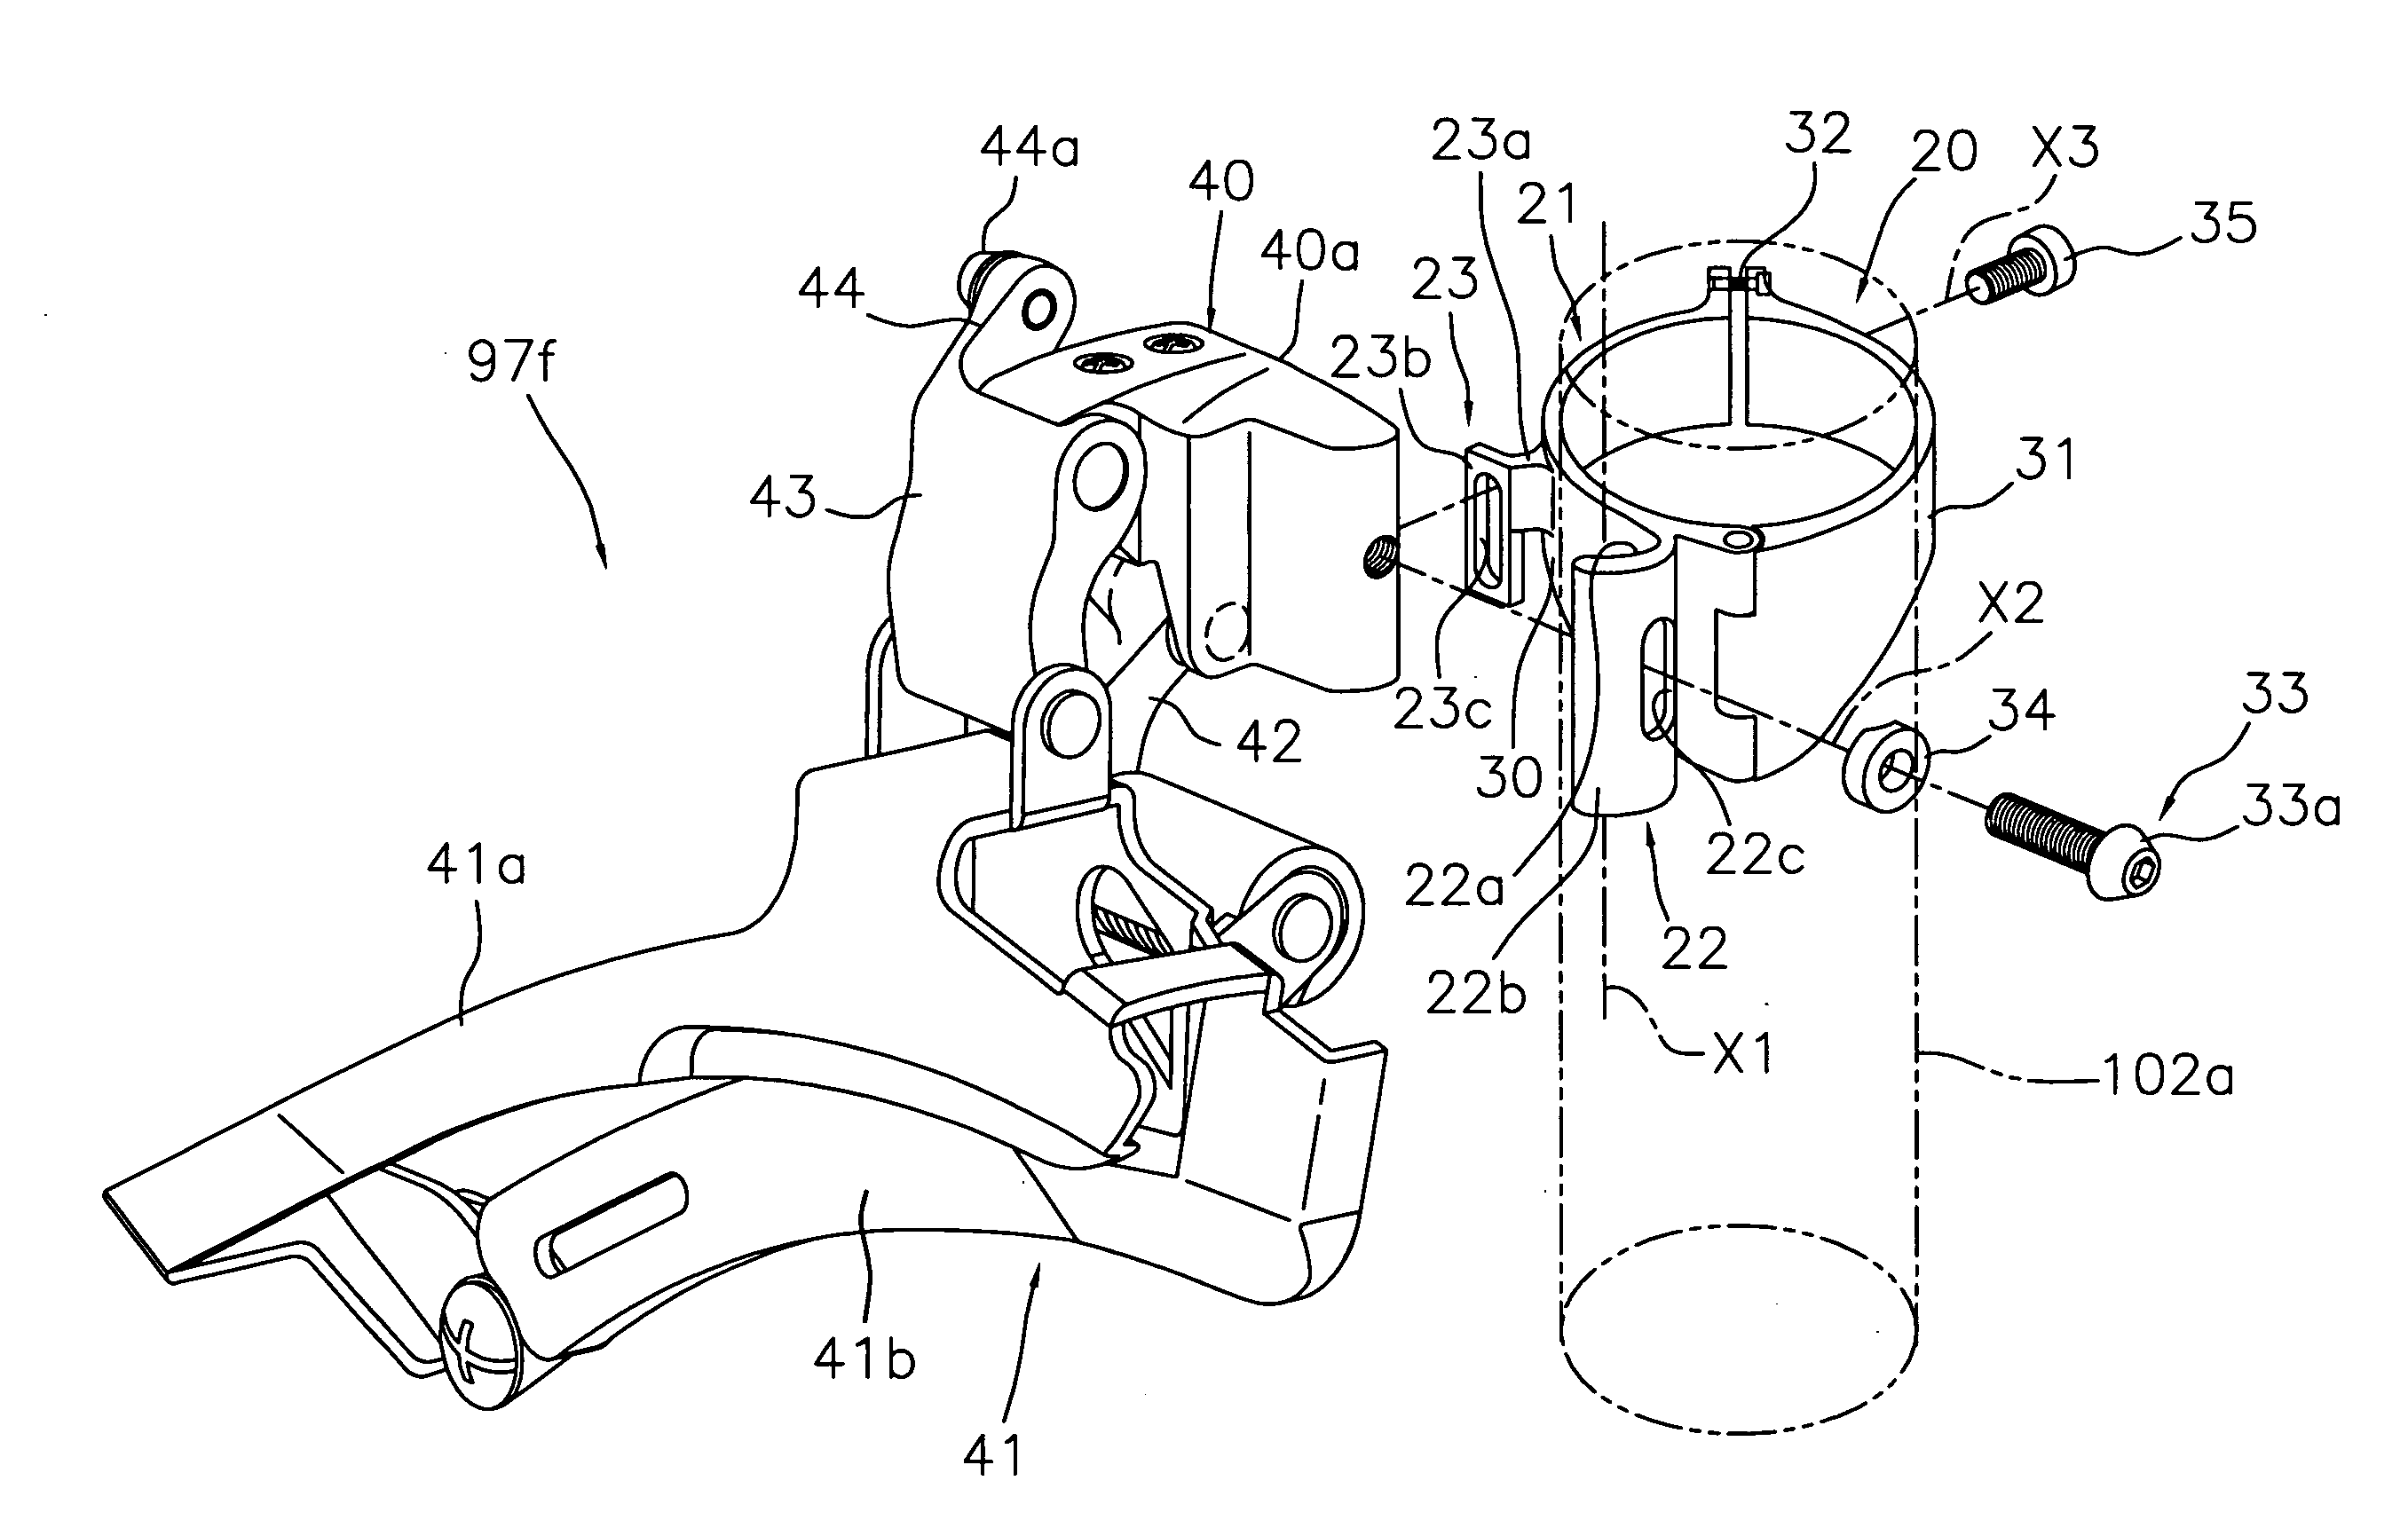 Front derailleur with mounting fixture